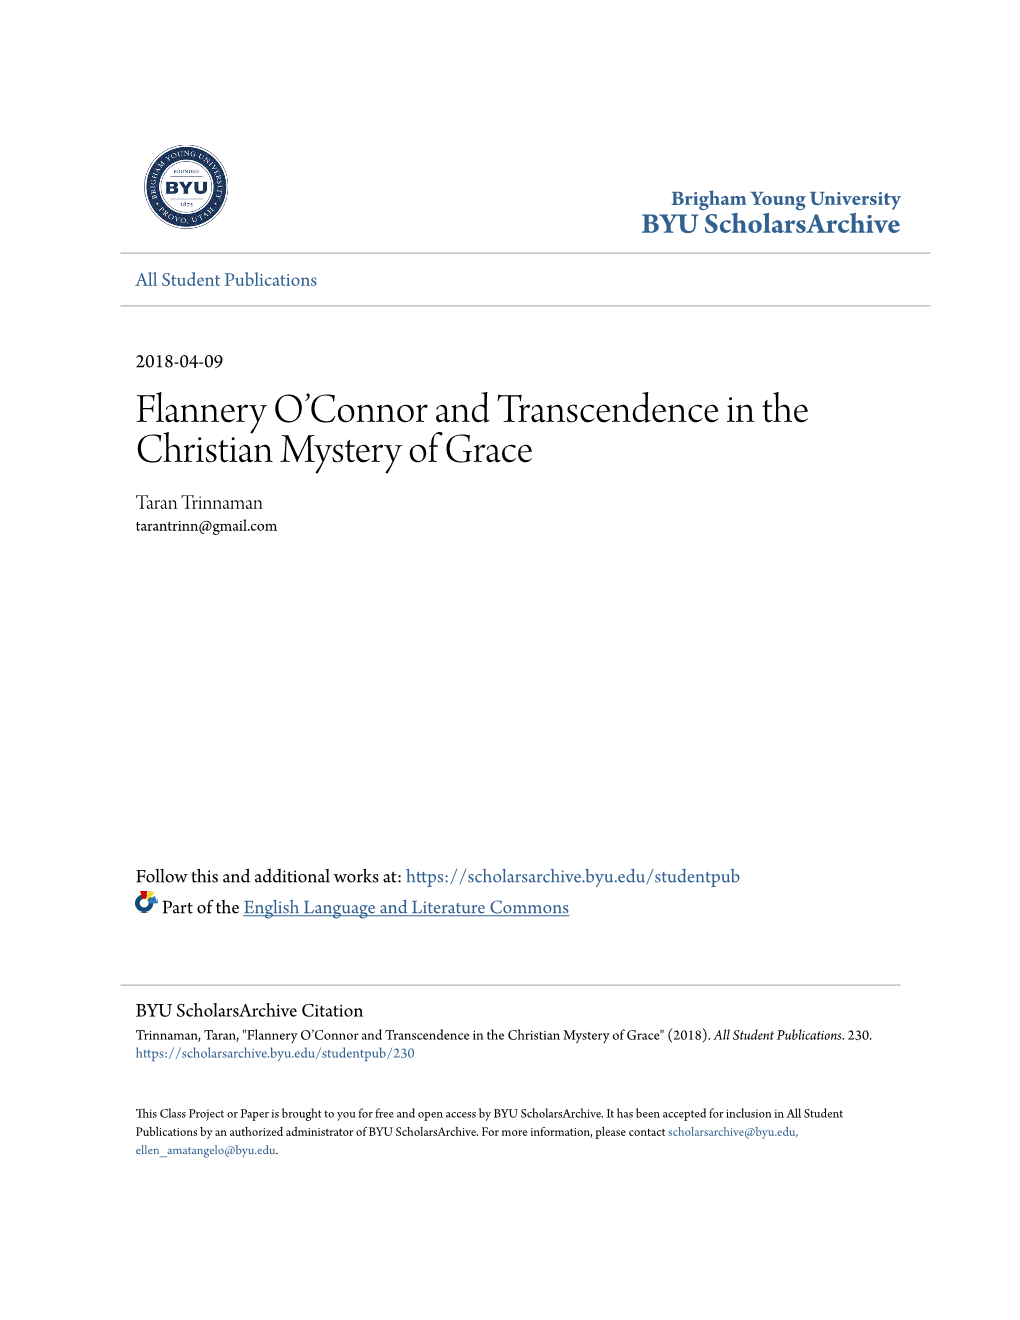 Flannery O'connor and Transcendence in the Christian Mystery of Grace